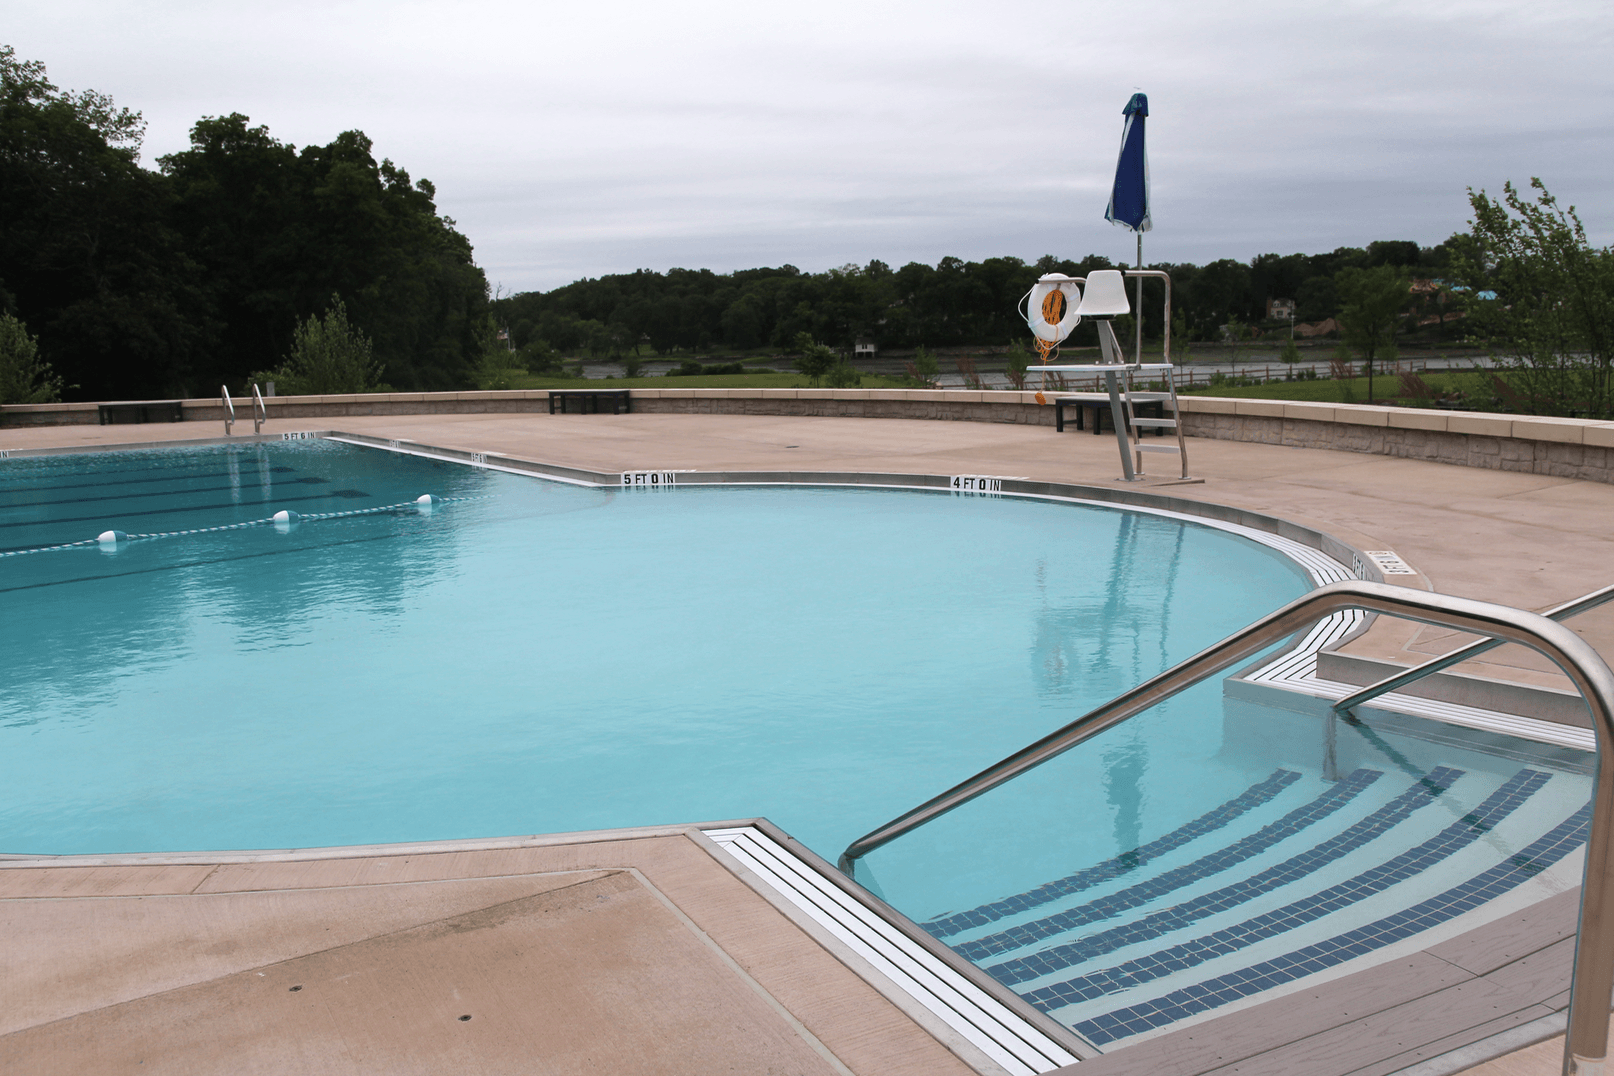 Greenwich Pool at Byram Park. June 27, 2018 Photo: Leslie Yager